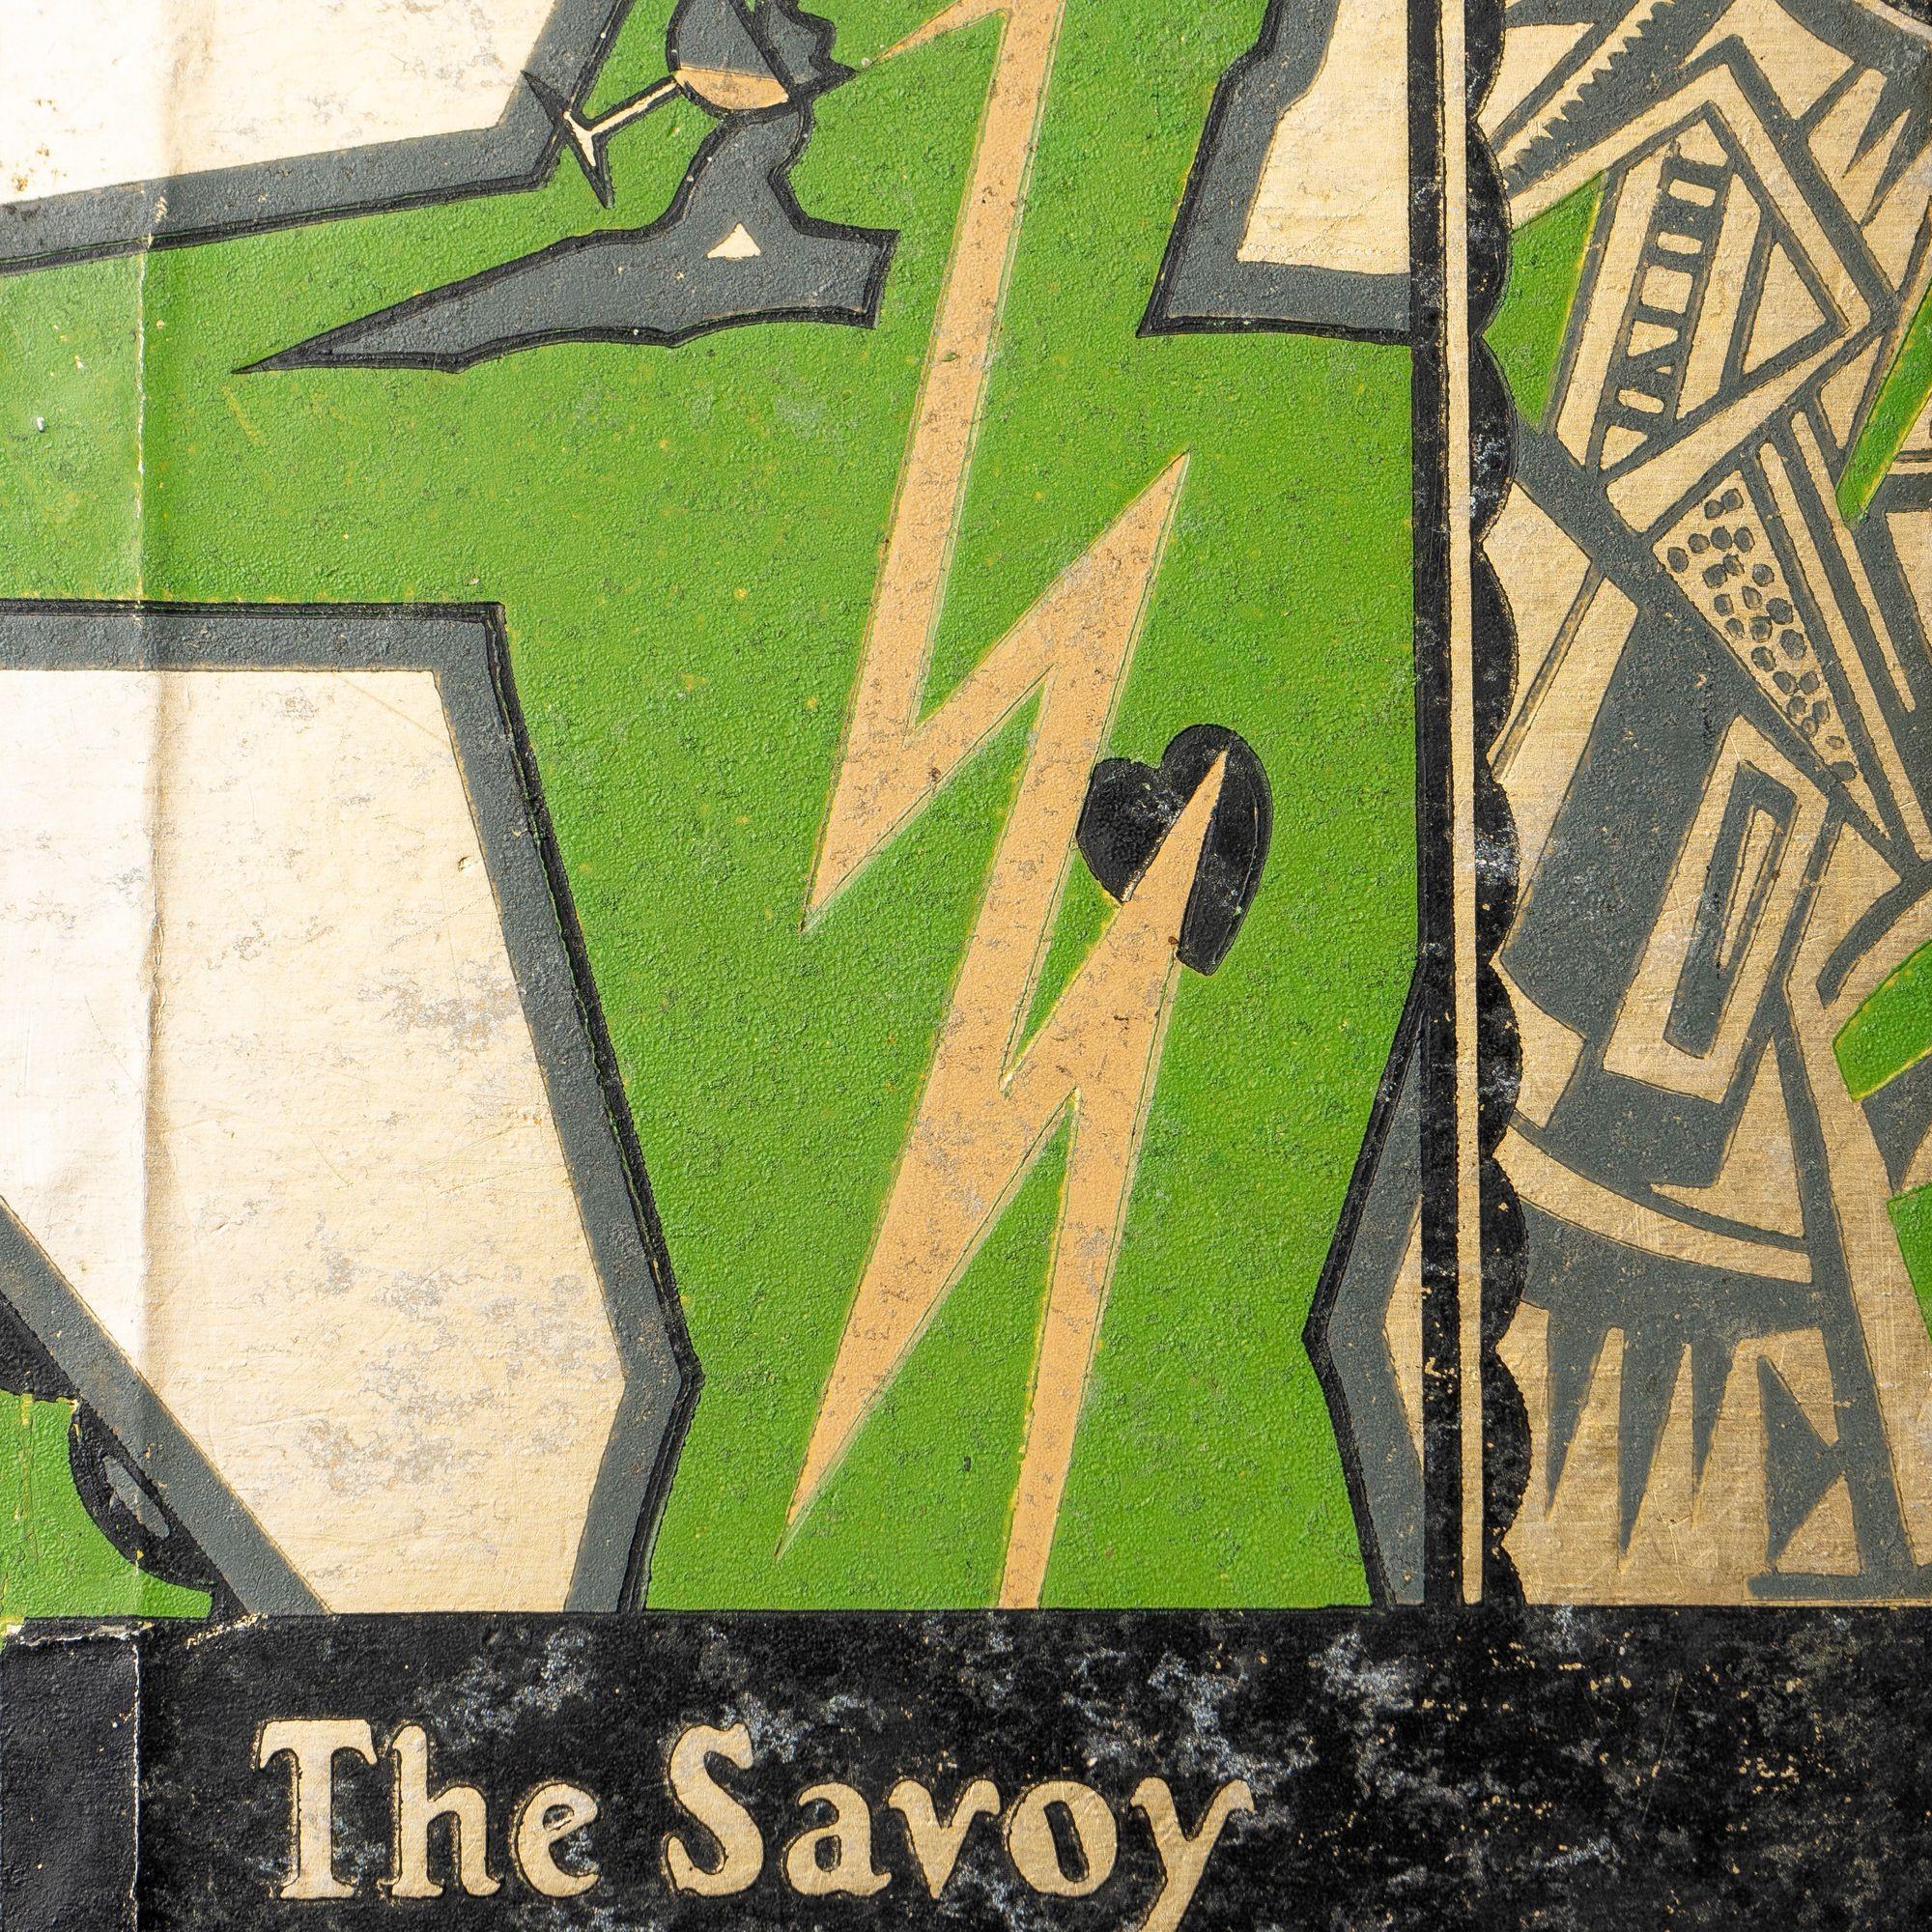 The savoy cocktail book by harry craddock, first edition 1930 7